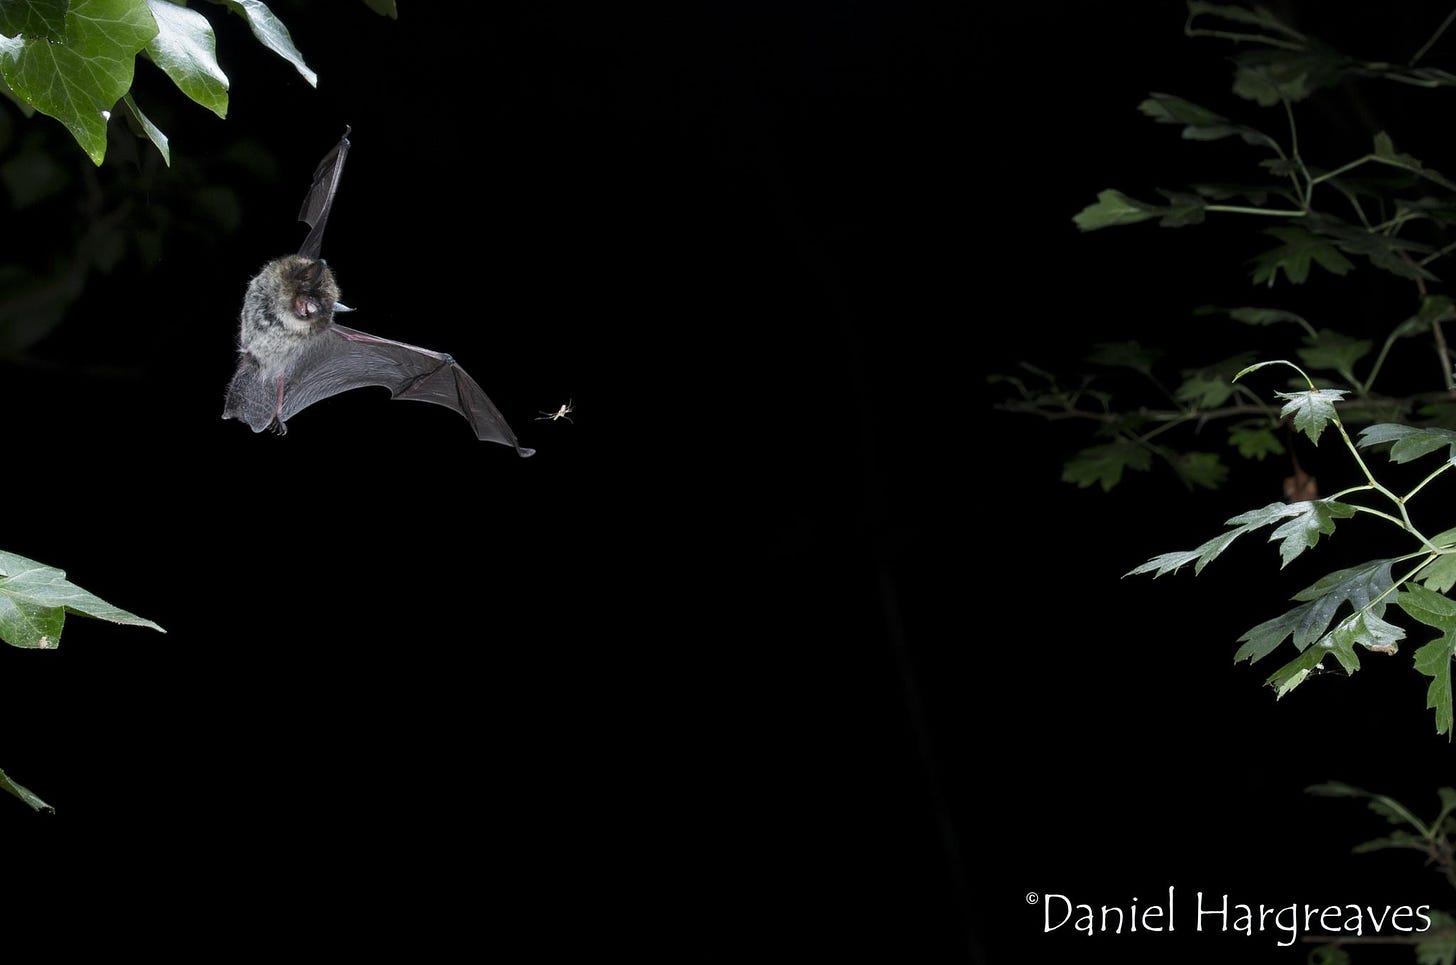 Whiskered bat chasing a mosquito, photo by Daniel Hargreaves/www.bats.org.uk